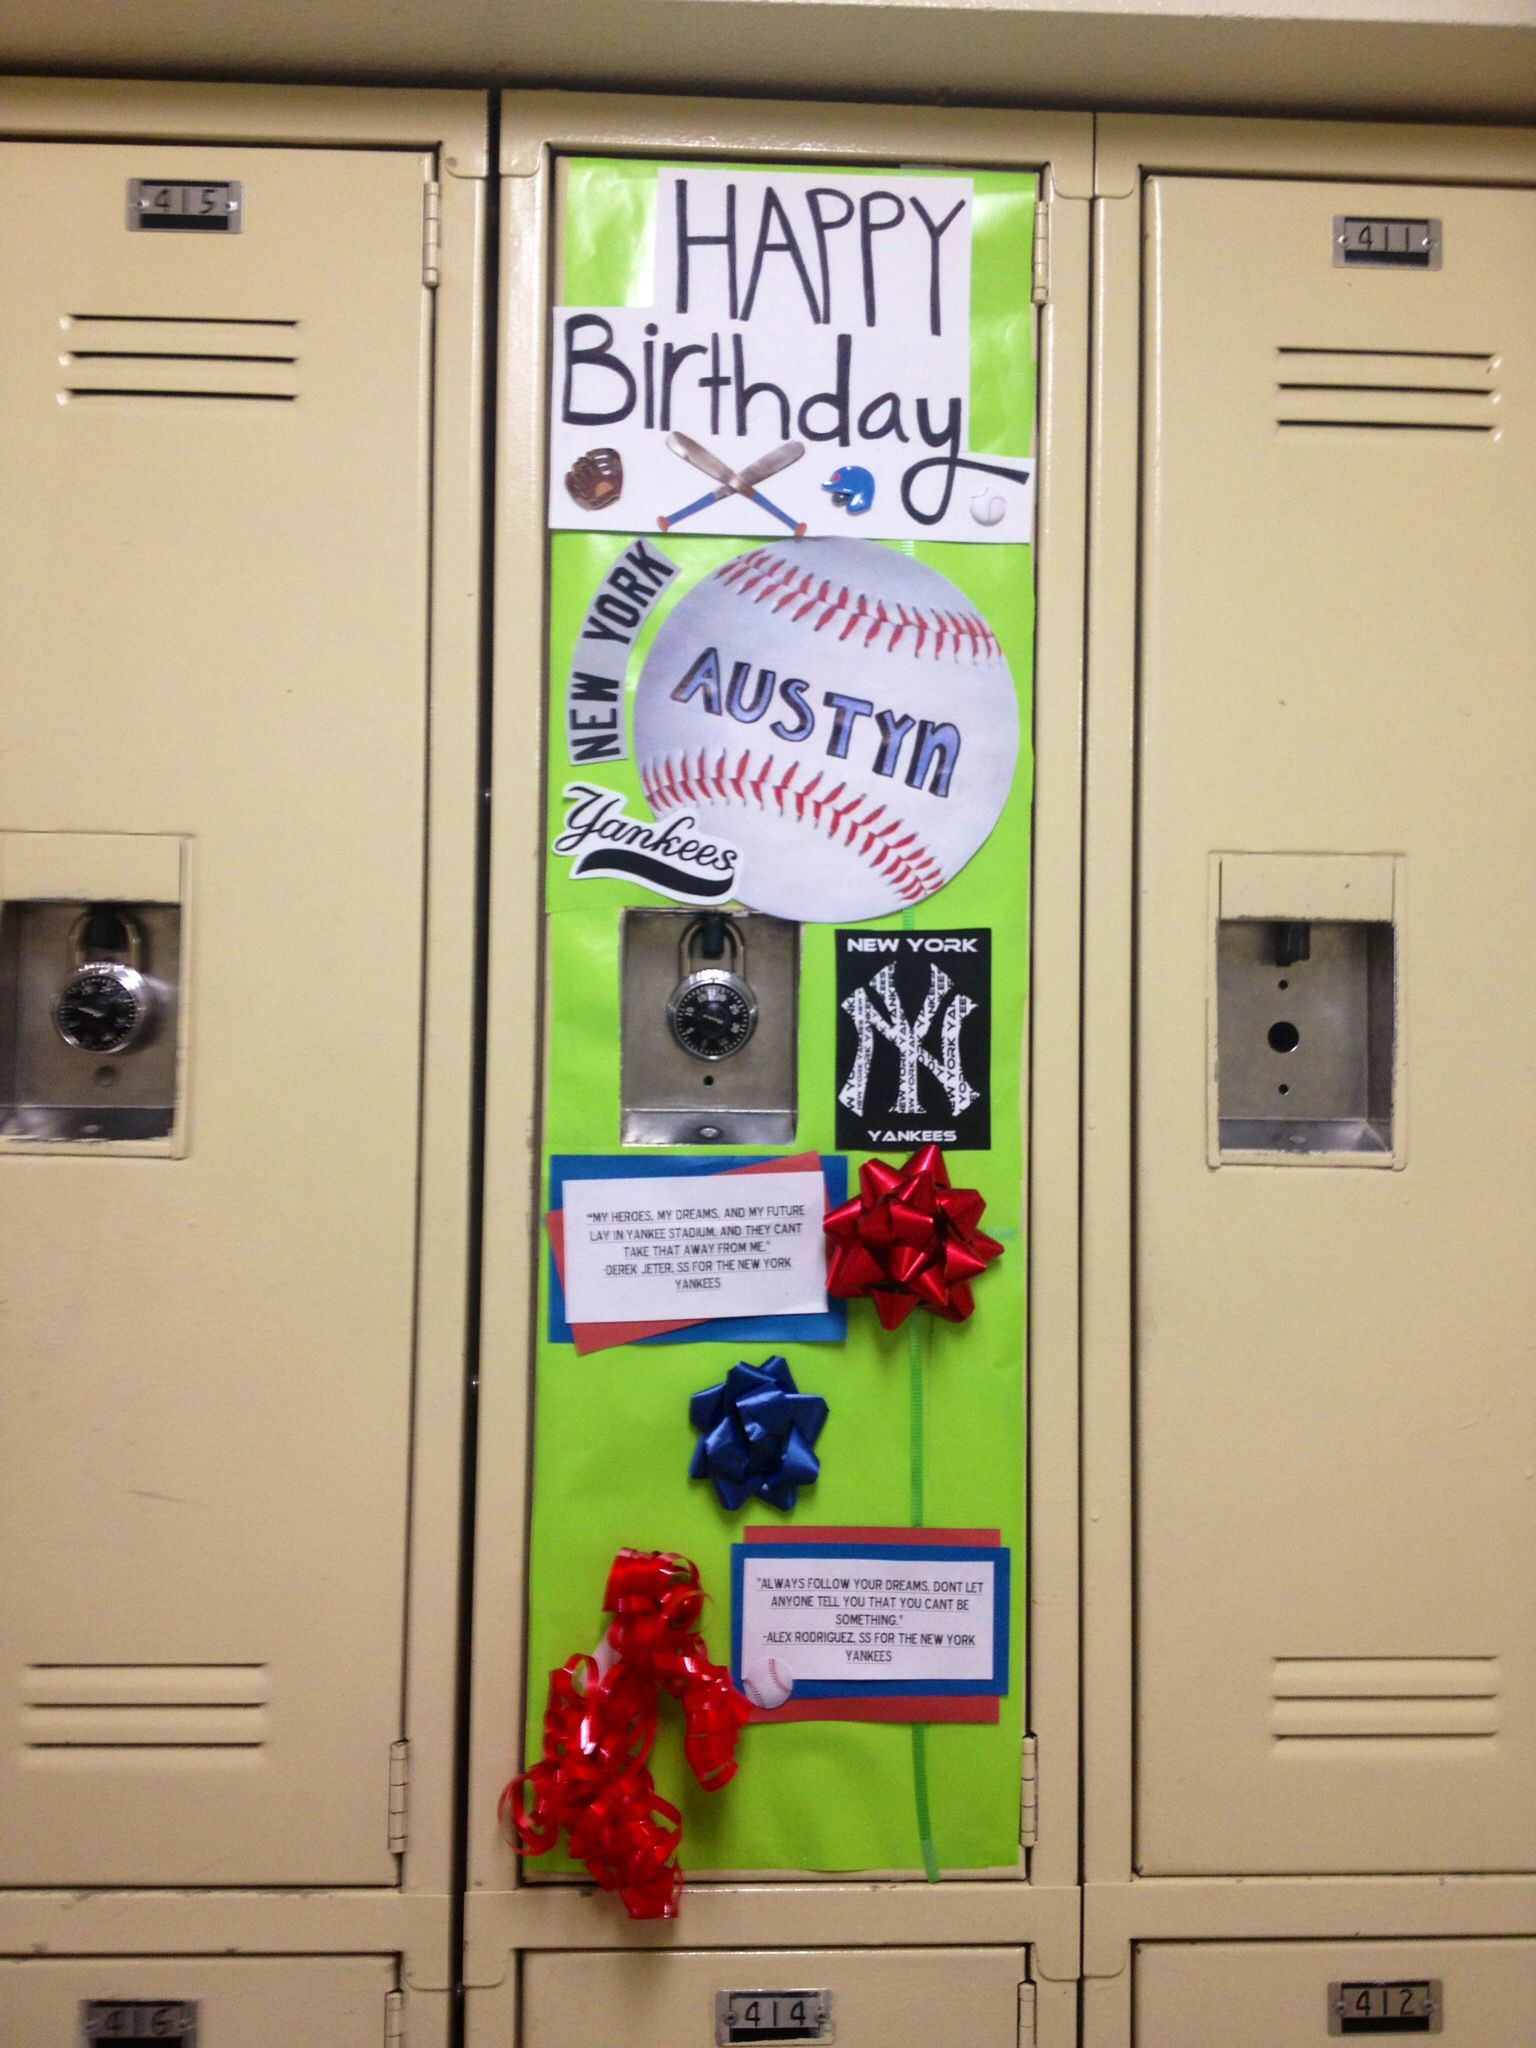 Decorated Lockers For Birthdays
 How I decorated my friend Austyn s Locker for his birthday